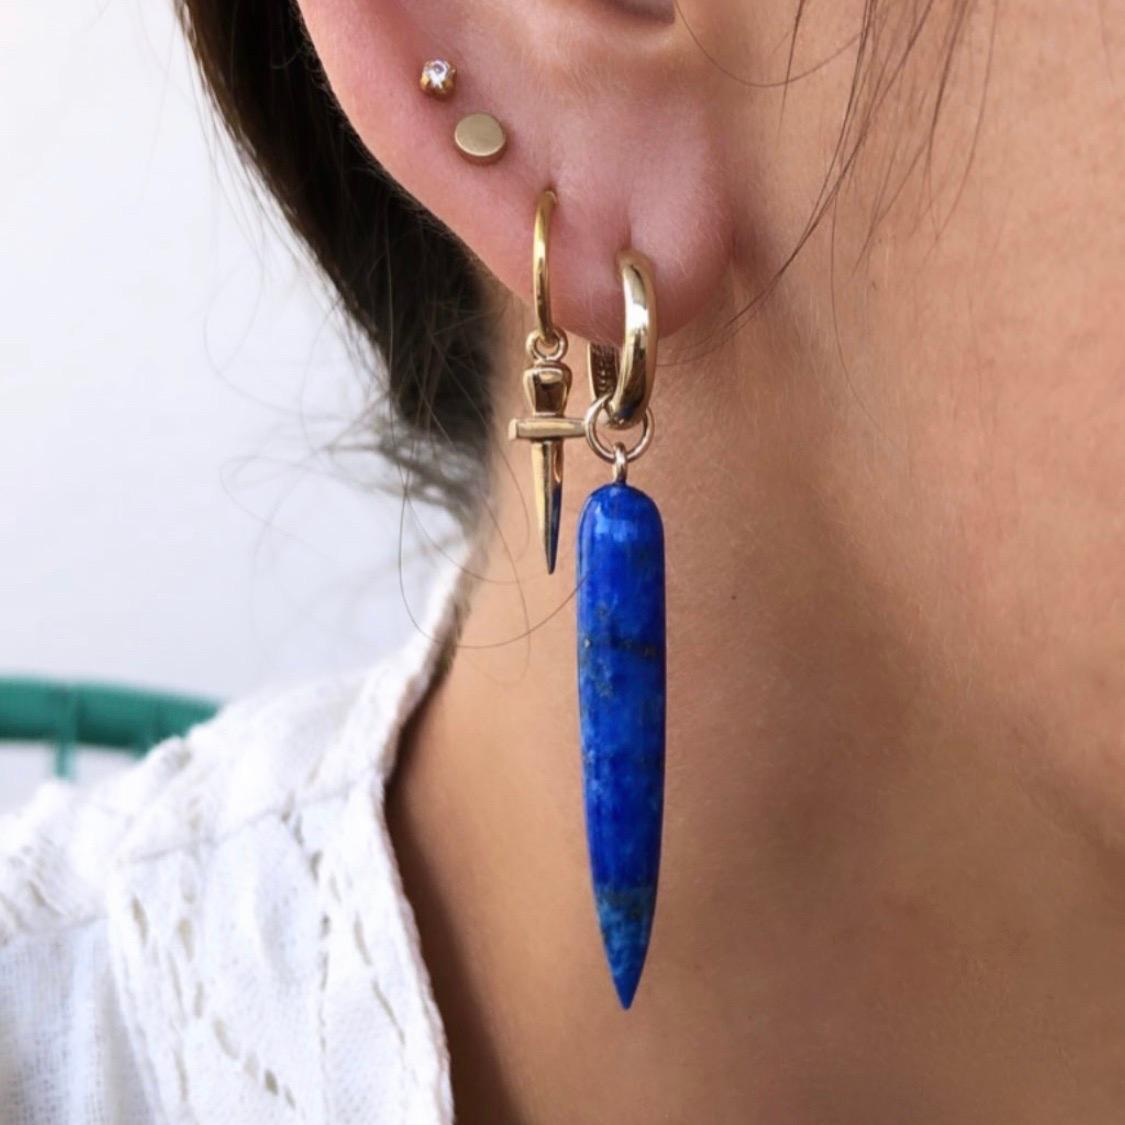 Add a touch of elegance and serenity to your look with these Solid 9k Yellow Gold Lapis Long Spike Huggie Drop Earrings. These earrings feature a stunning combination of lapis lazuli and yellow gold, creating a timeless and sophisticated